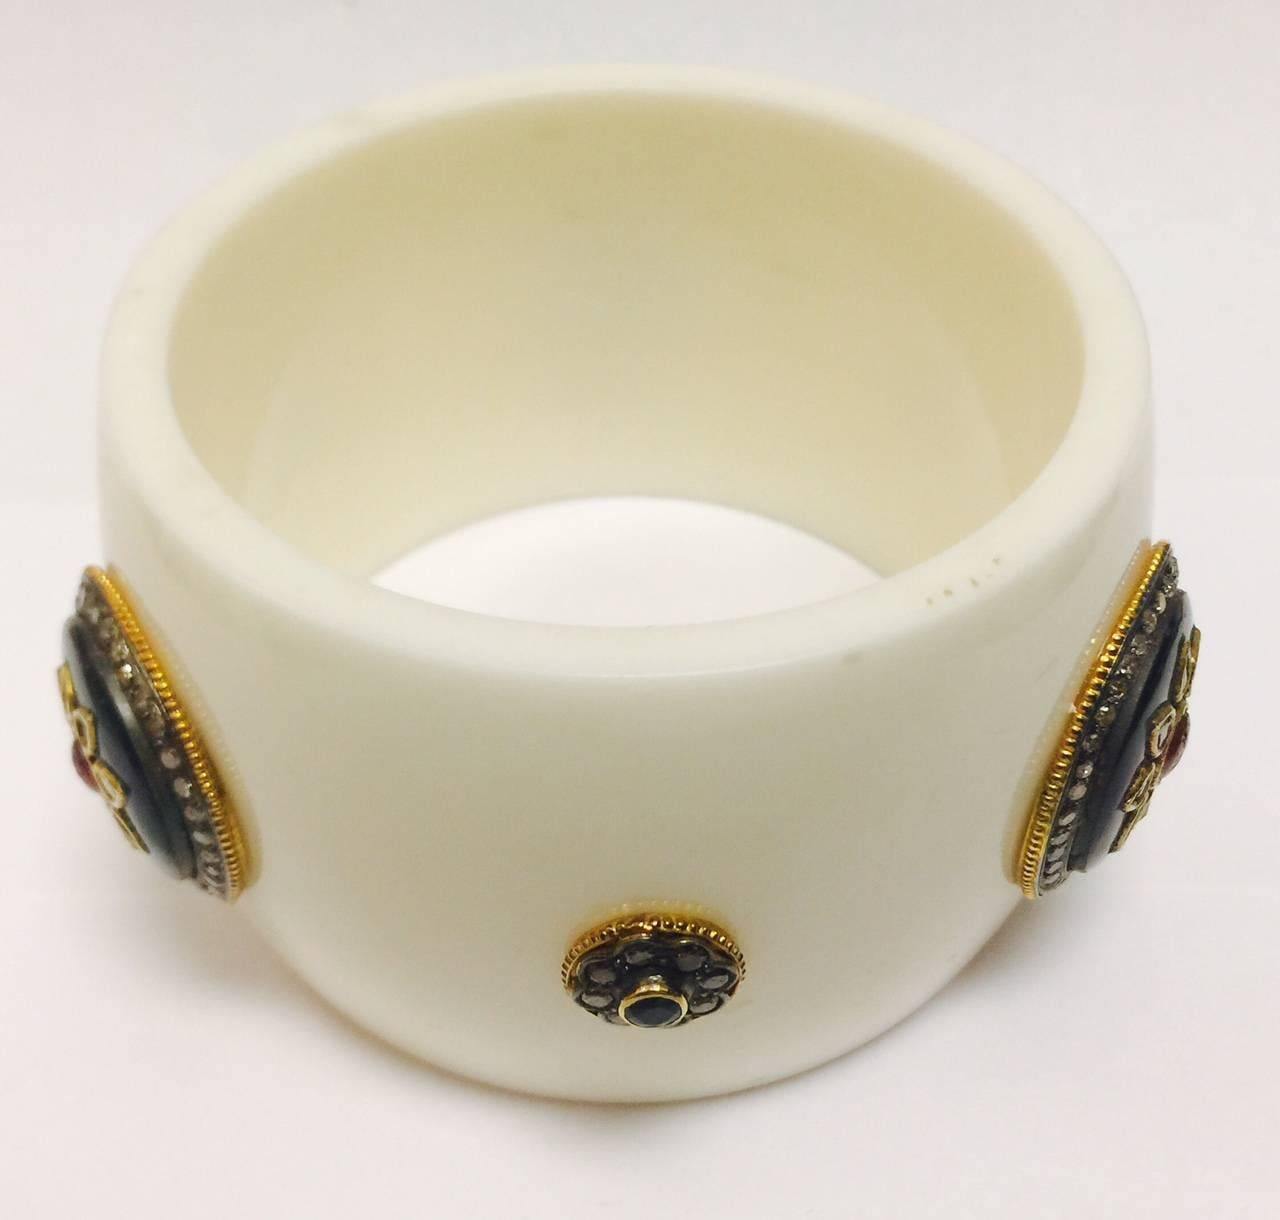 Retro yet modern!  This ivory color bakelite cuff features different size fittings containing single cut diamonds, macle diamonds and fine enamel work.  Fittings are finished in ribbed borders.  A ruby, a pink tourmaline and faceted onyx grace the